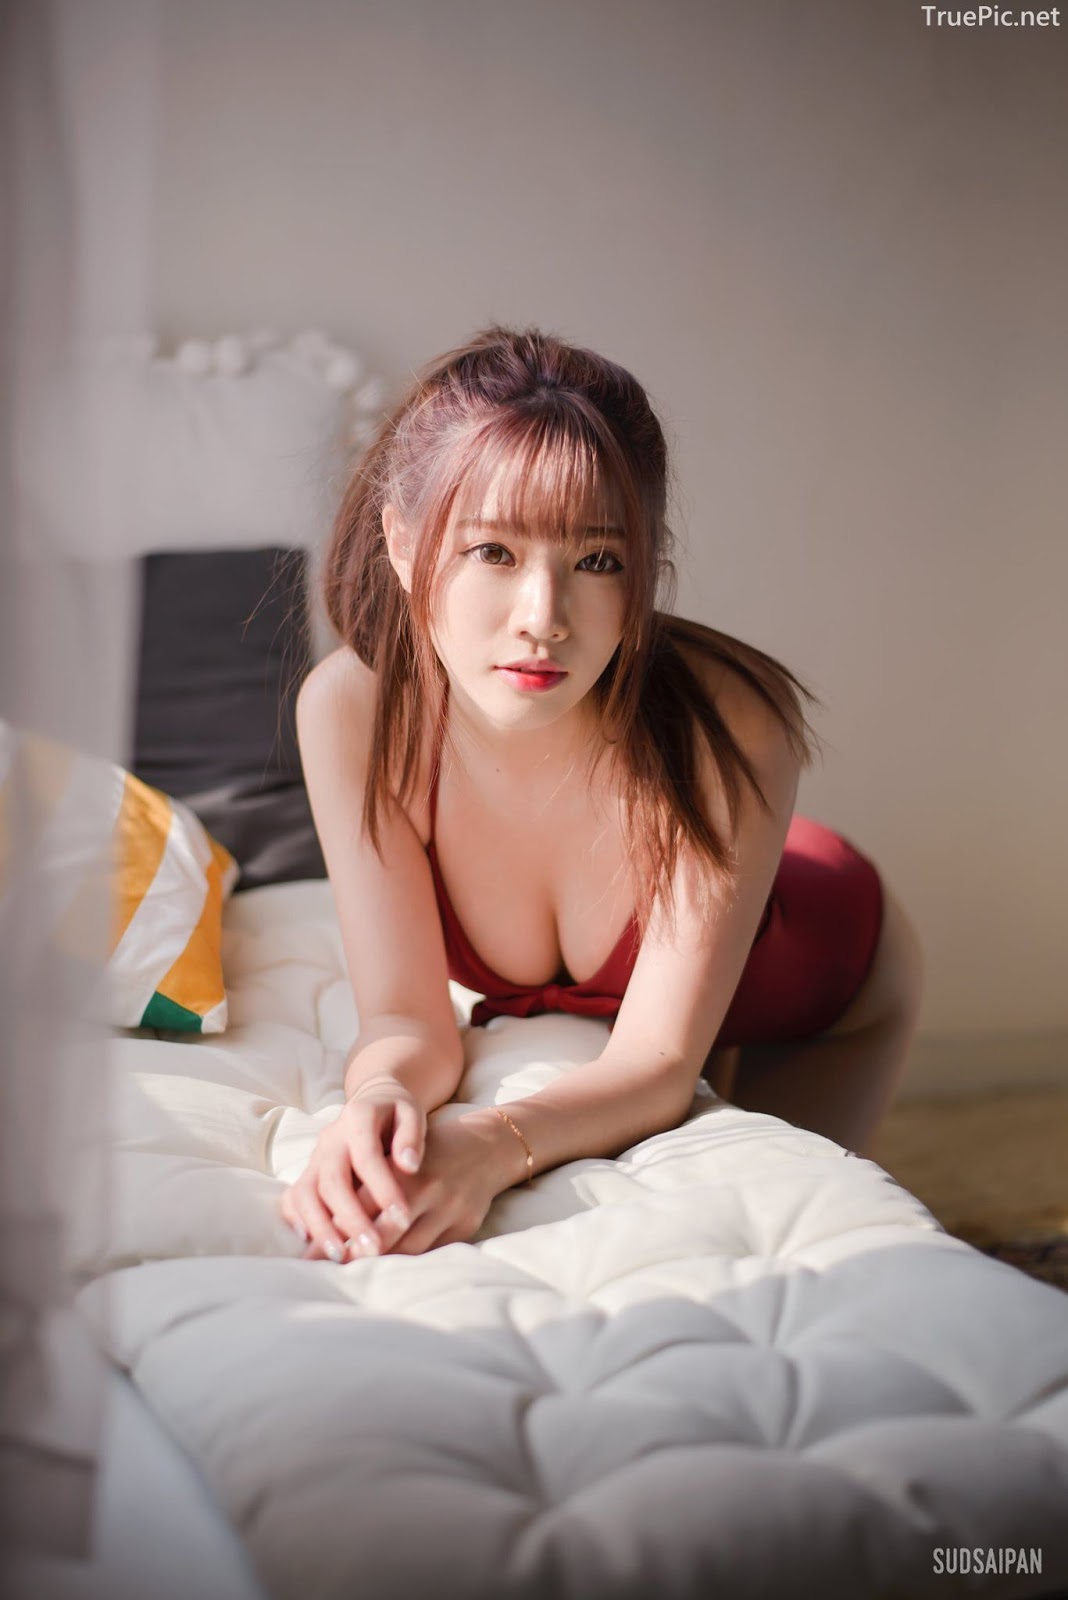 Chinese hot streaming girl - 簡欣汝 - Red Swimming Suit - TruePic.net - Picture 15